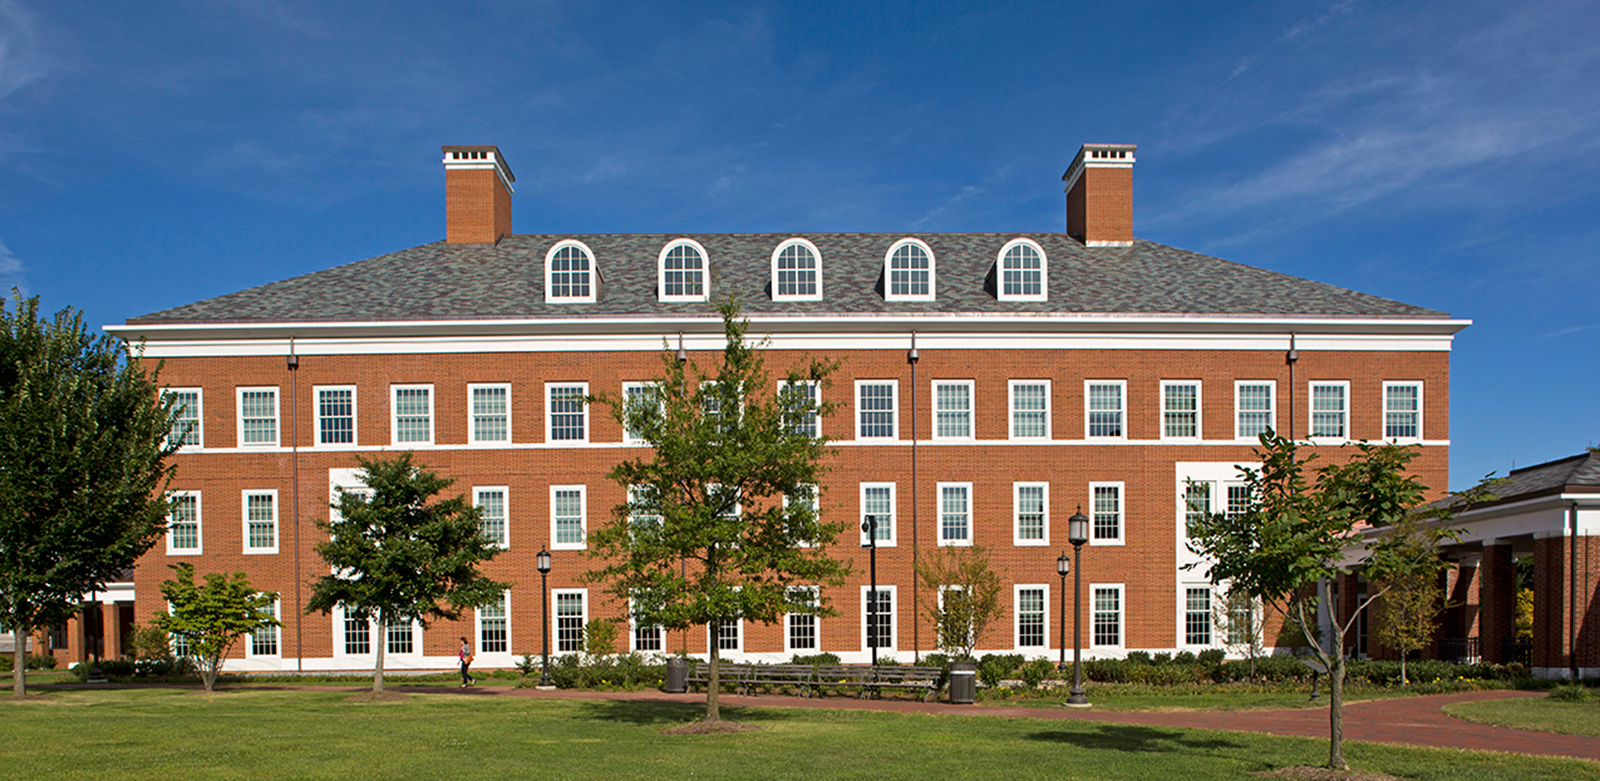 Johns Hopkins University, Malone Hall, Academic and Research Facility